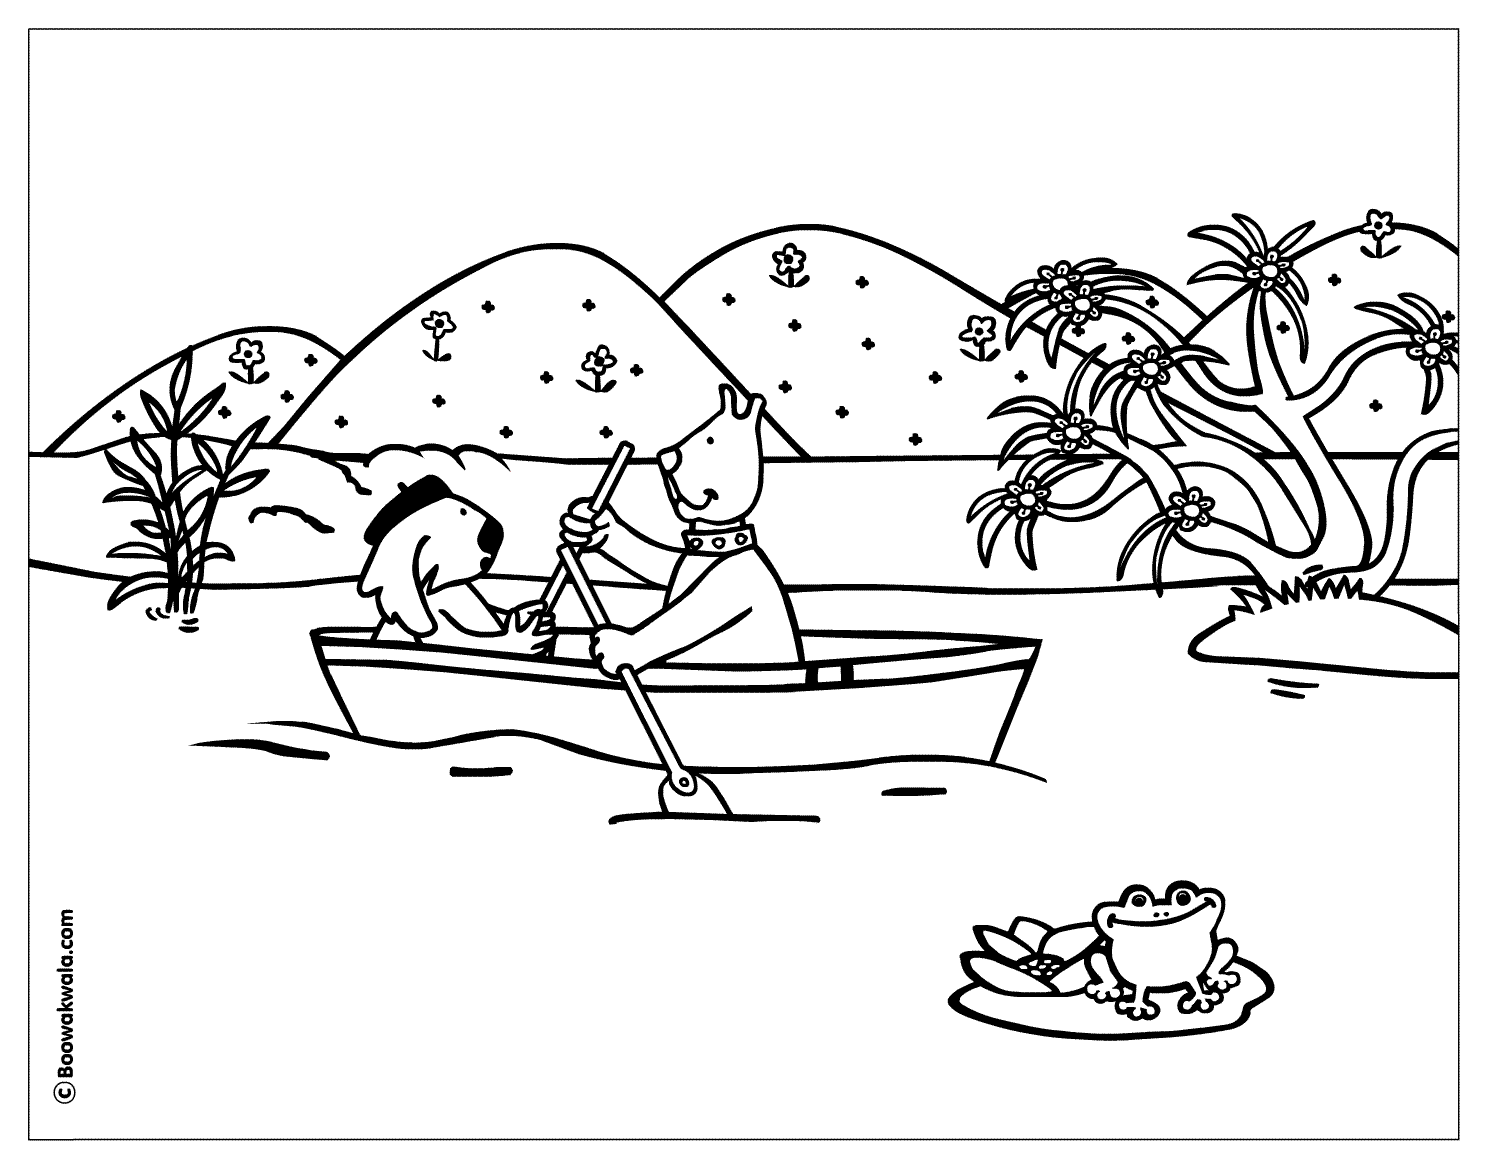 Coloring page: Small boat / Canoe (Transportation) #142210 - Free Printable Coloring Pages